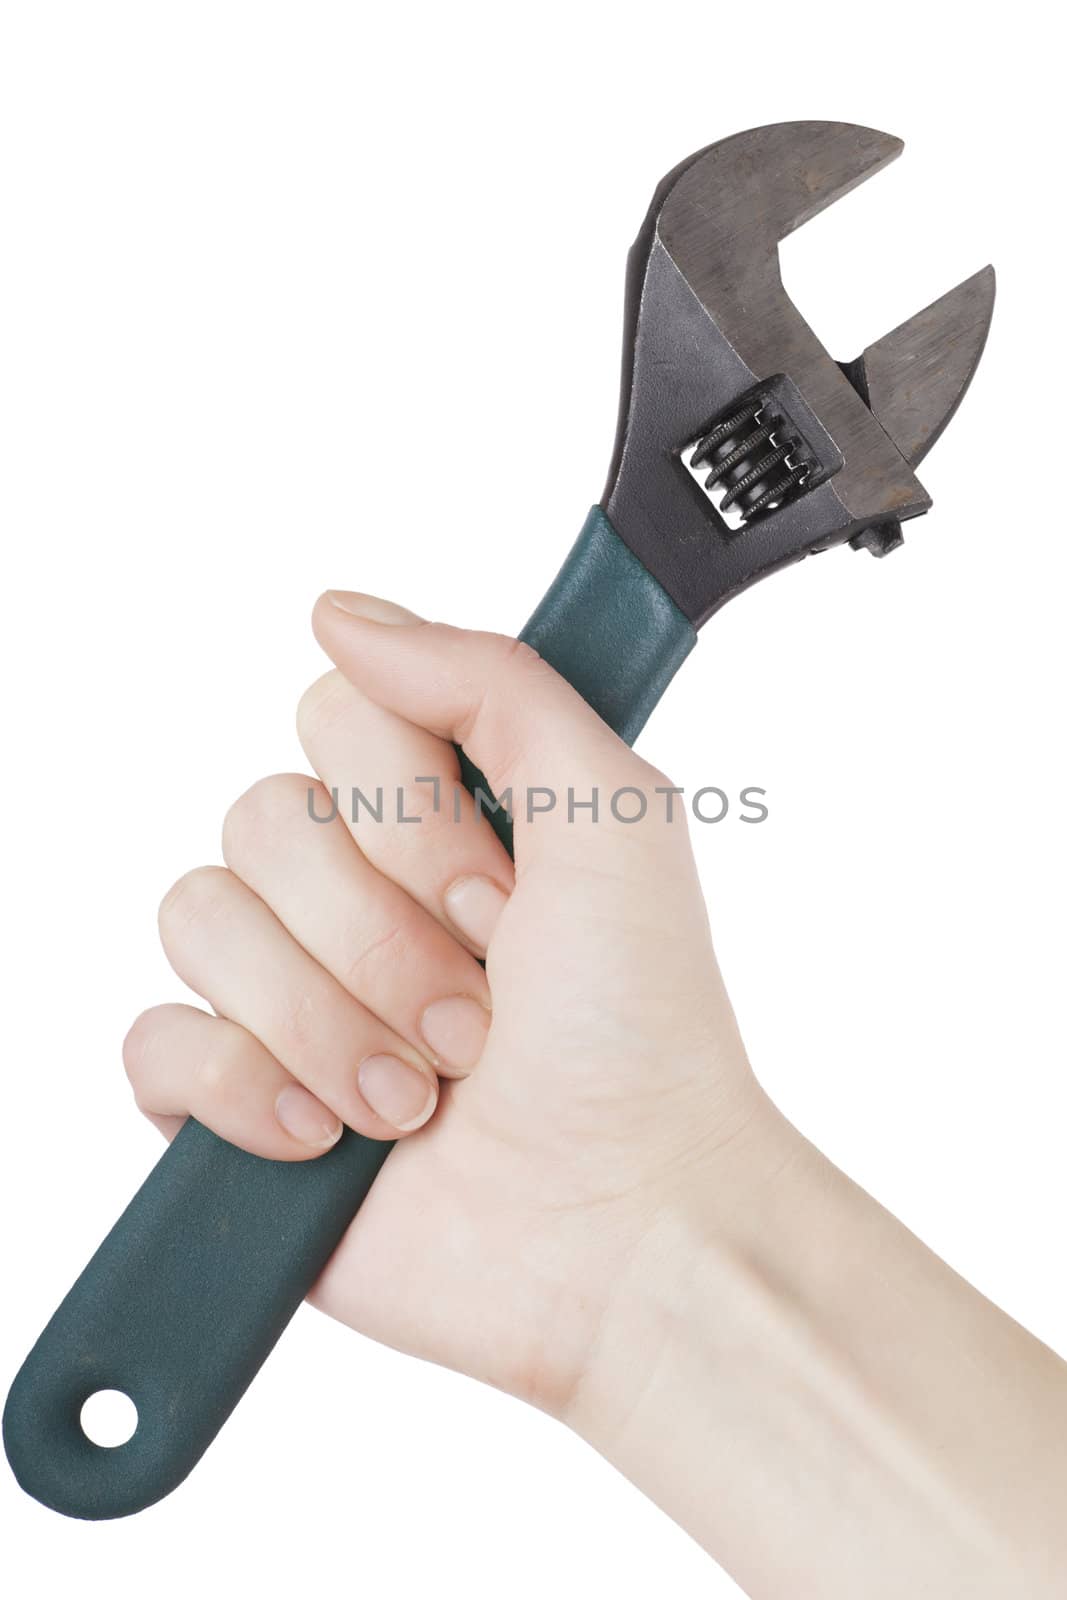 Adjustable wrench in woman's hand isolated over white background